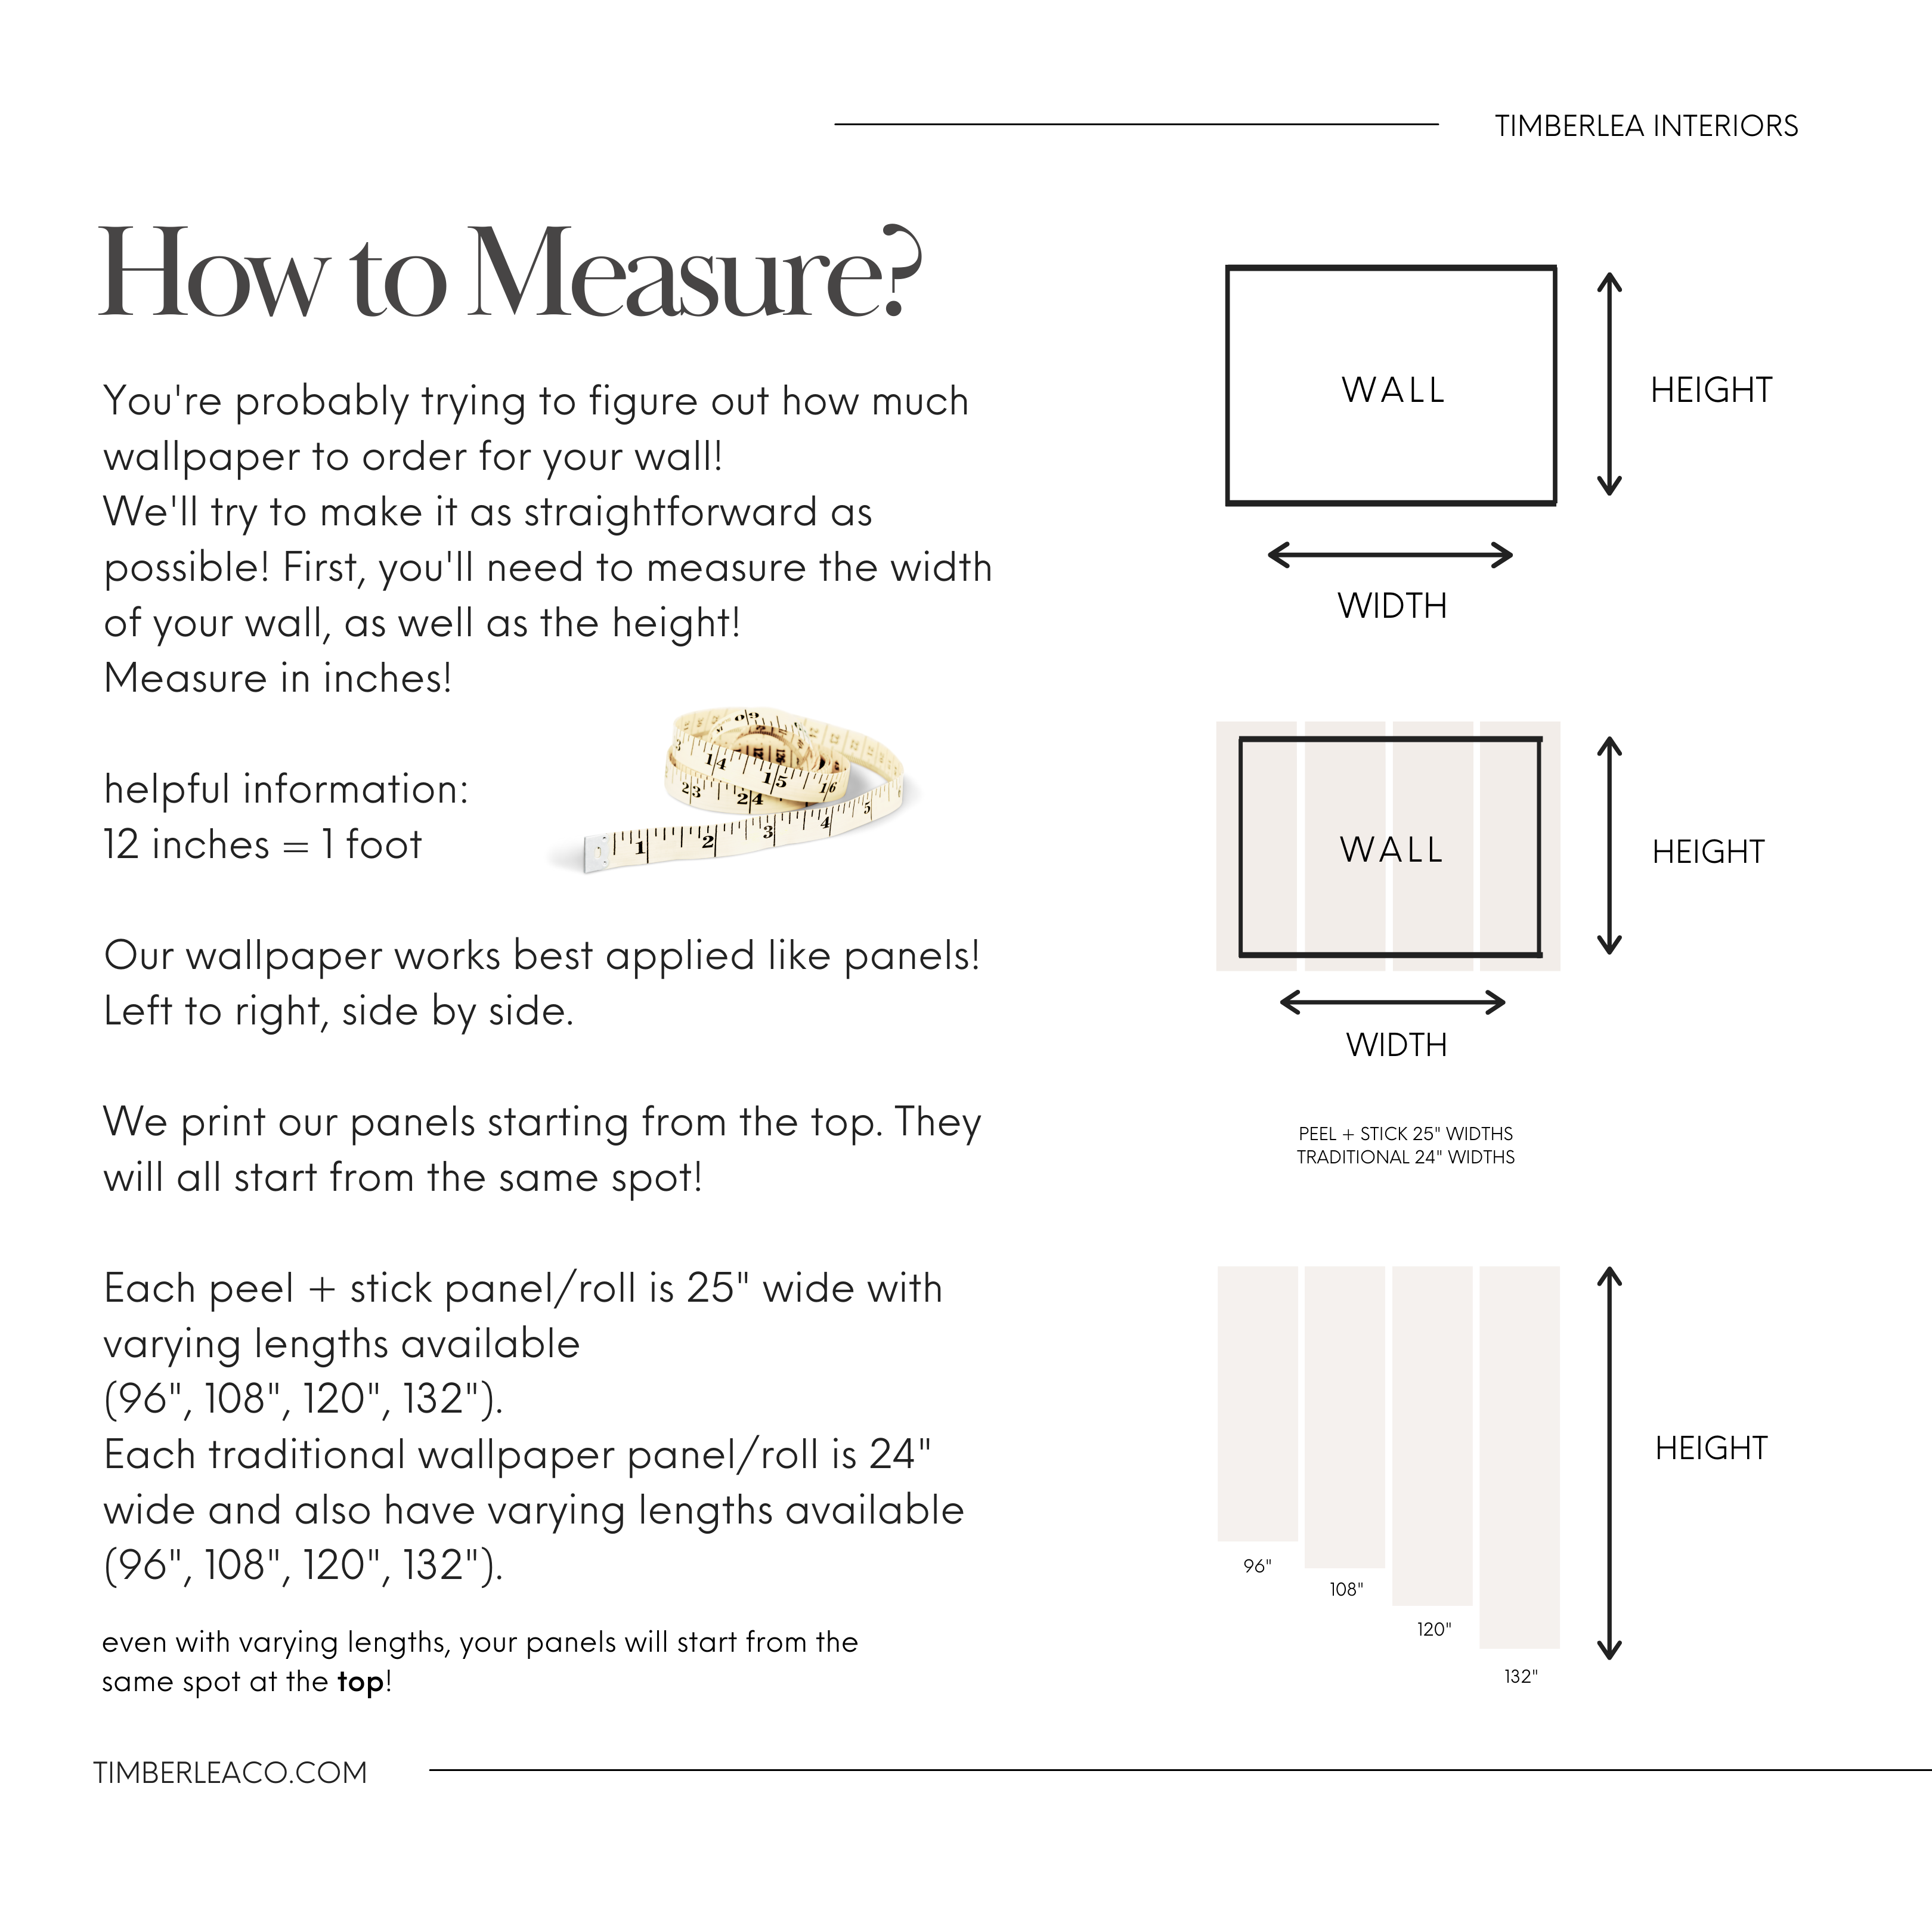 An instructional graphic by Timberlea Interiors titled 'How to Measure', outlining the steps to calculate the amount of wallpaper needed for a wall. It shows an illustration of a wall with directions to divide the wall's width by either 25 or 24 inches, depending on the wallpaper type, along with a note on rounding up to whole numbers for the number of rolls required.